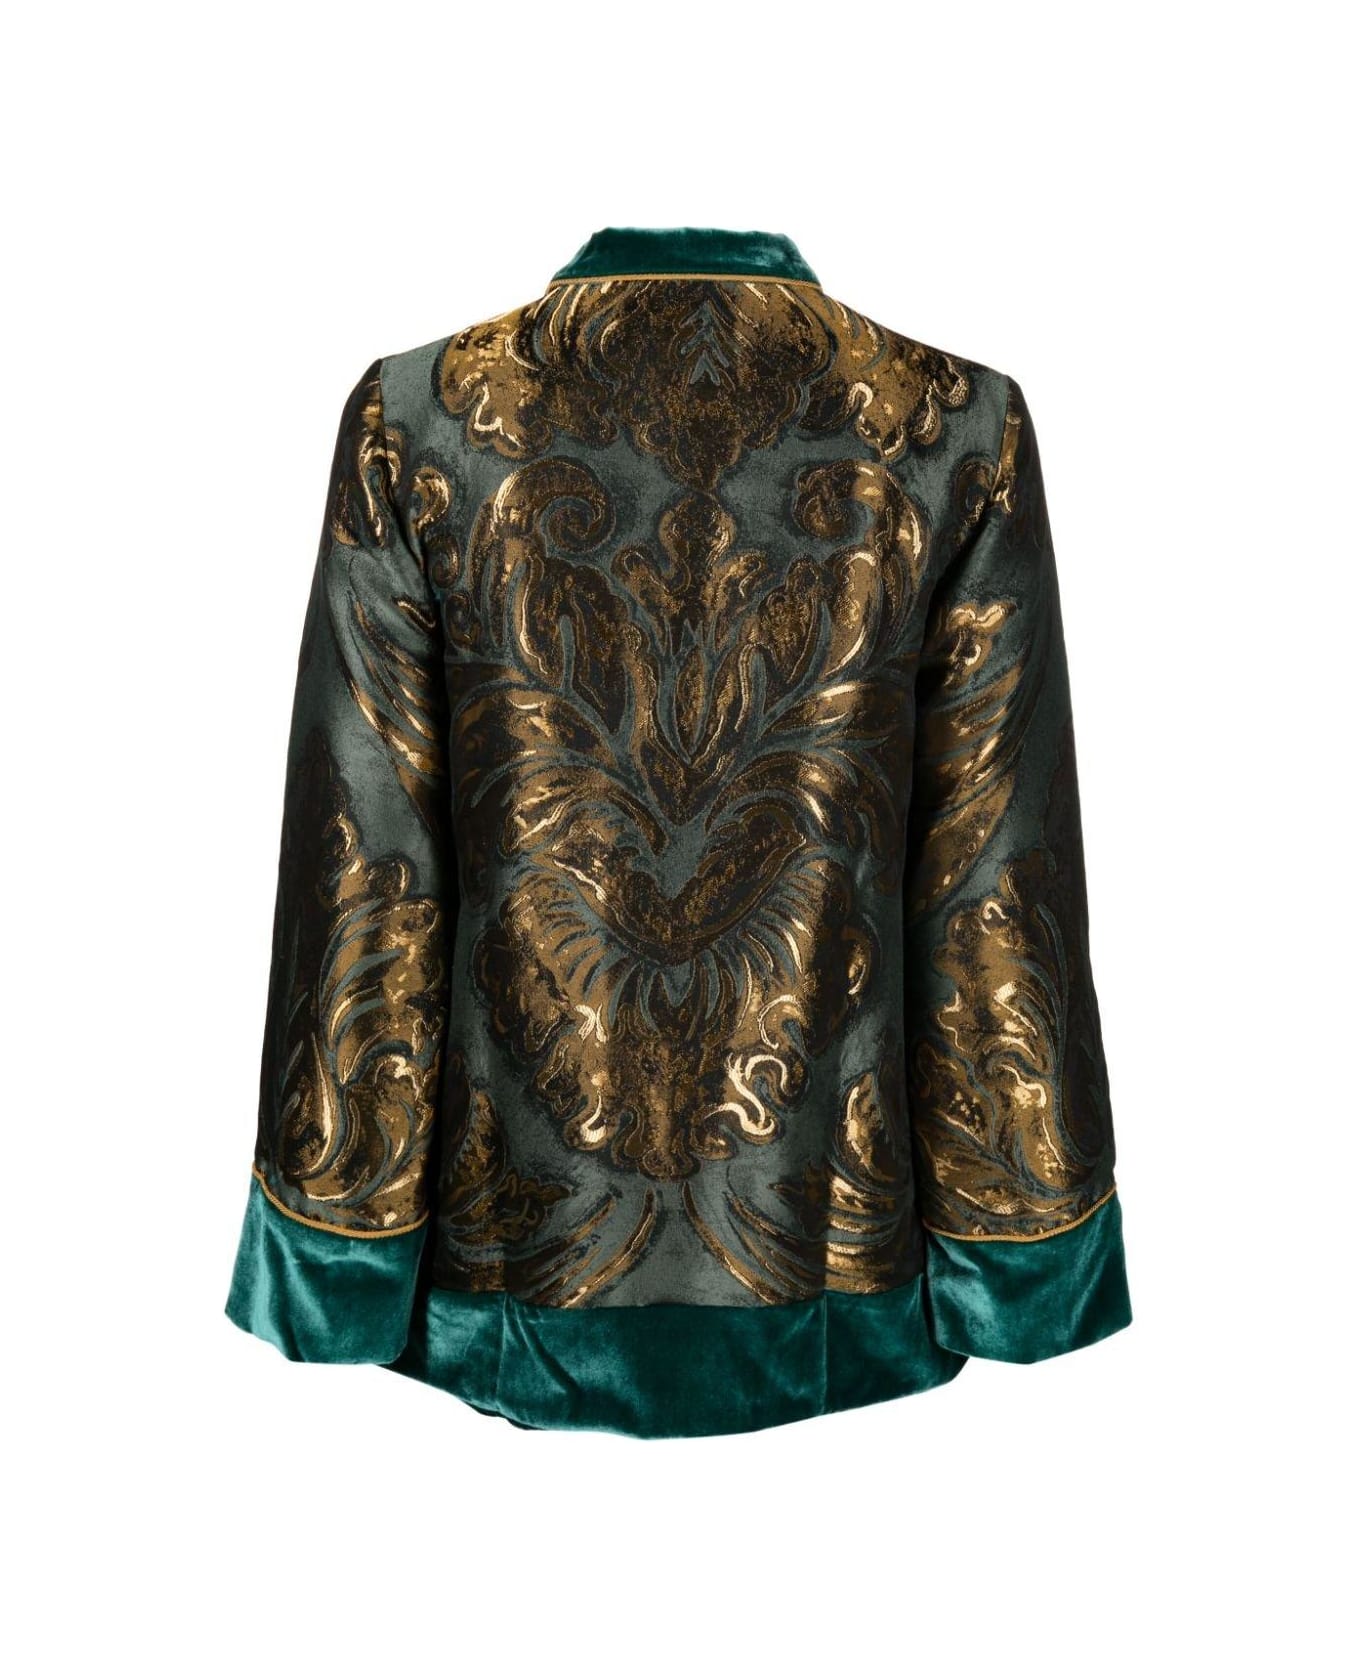 For Restless Sleepers Panelled Collared Jacket - Golden